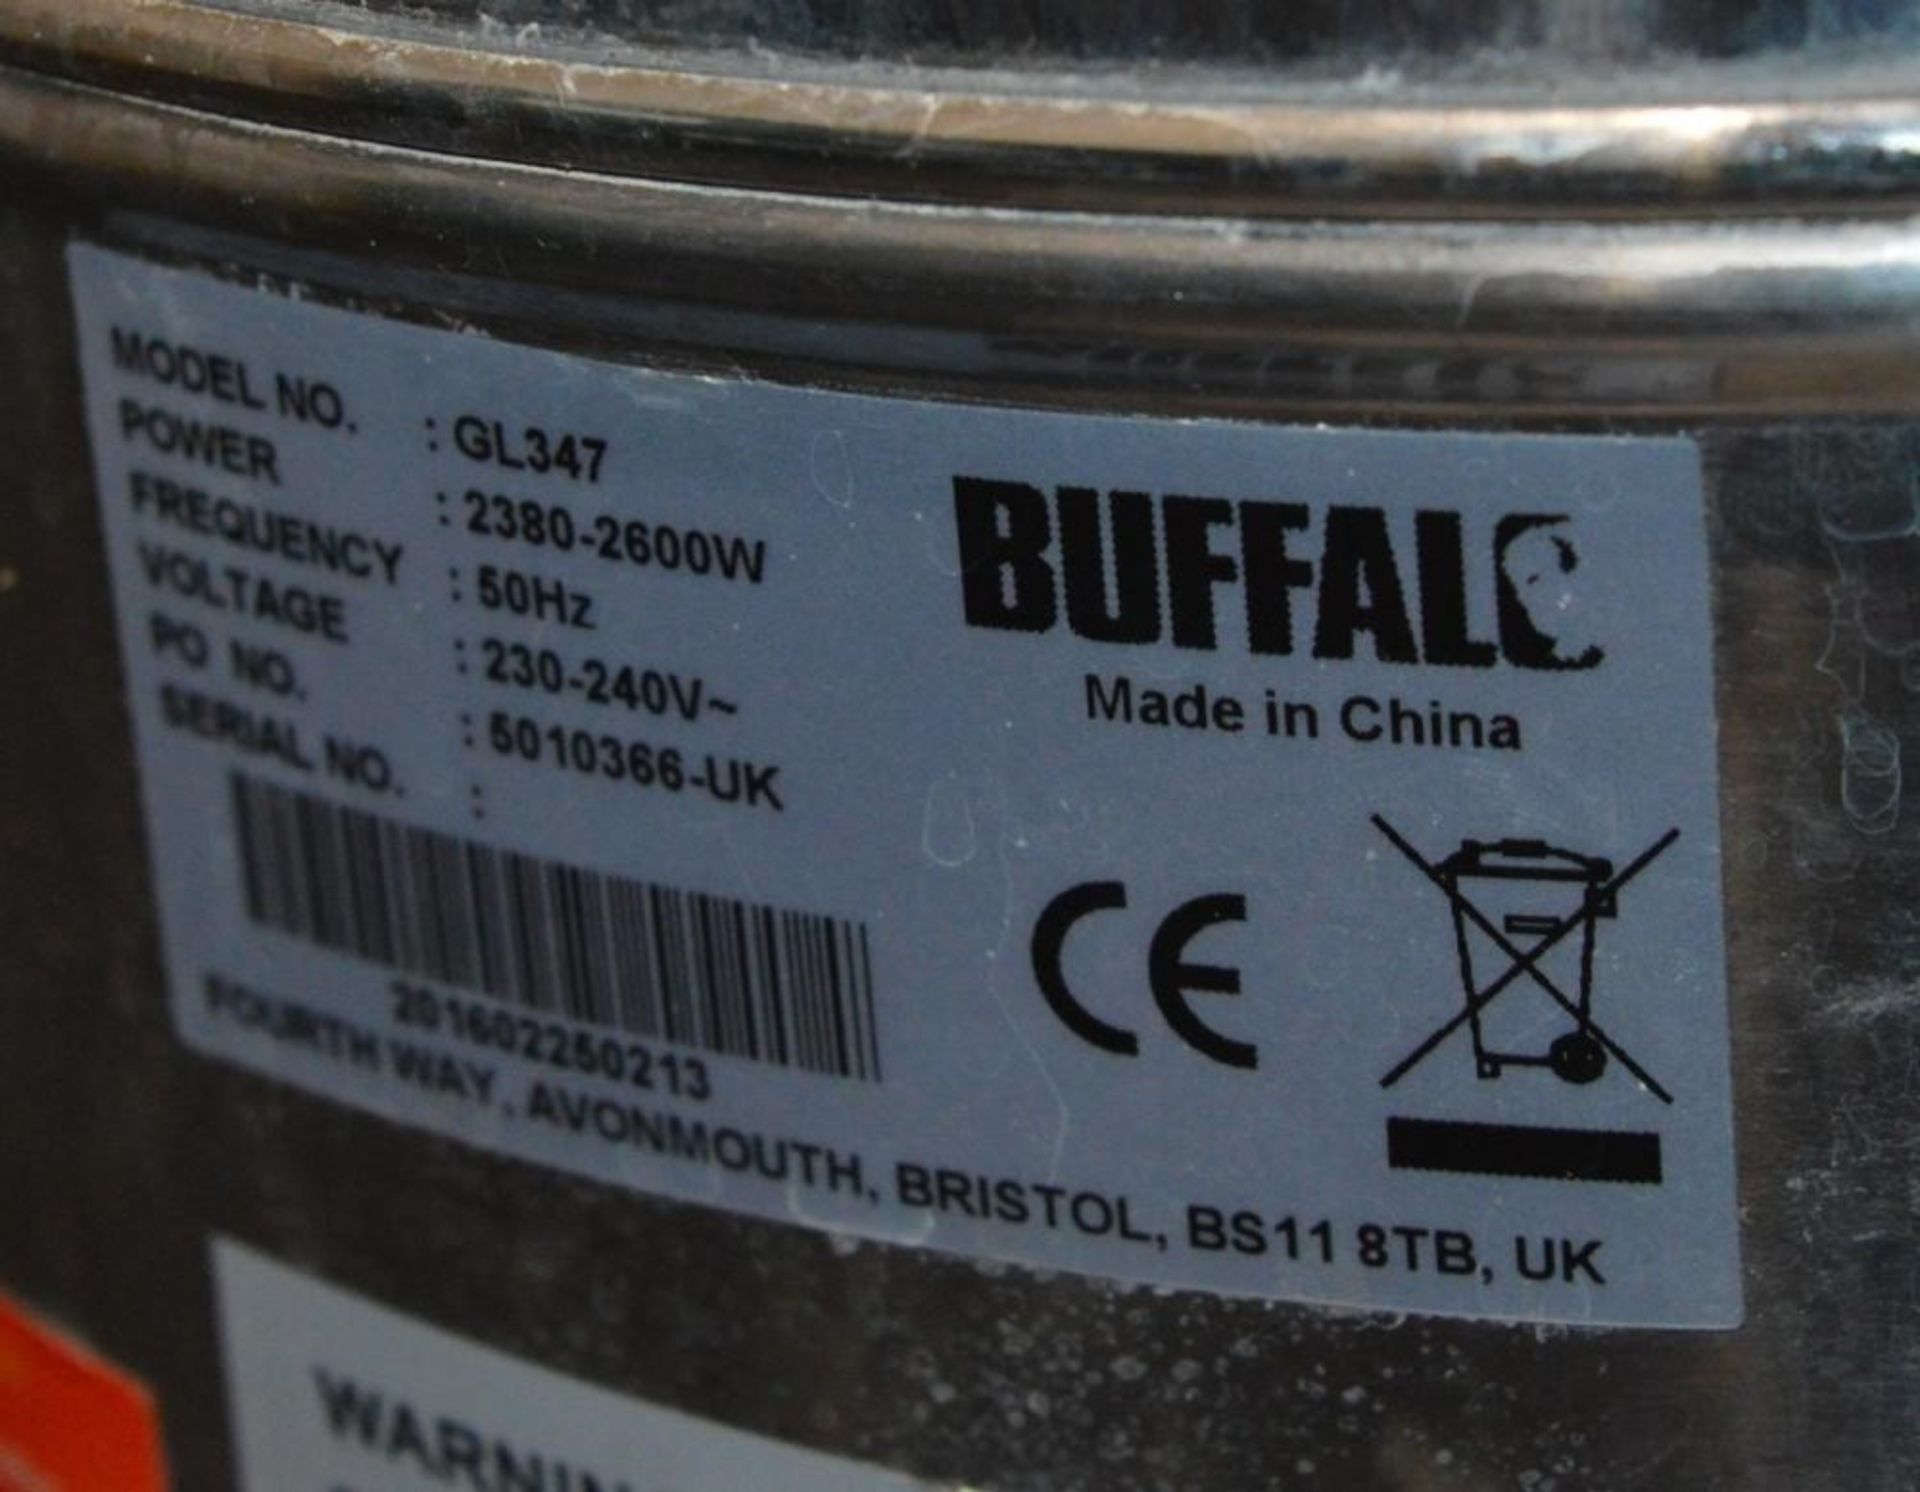 1 x Buffalo GL347 Manual Fill Water Boilet 20 Litre With Stainless Steel Finish - Ref BB305 PTP - CL - Image 2 of 2